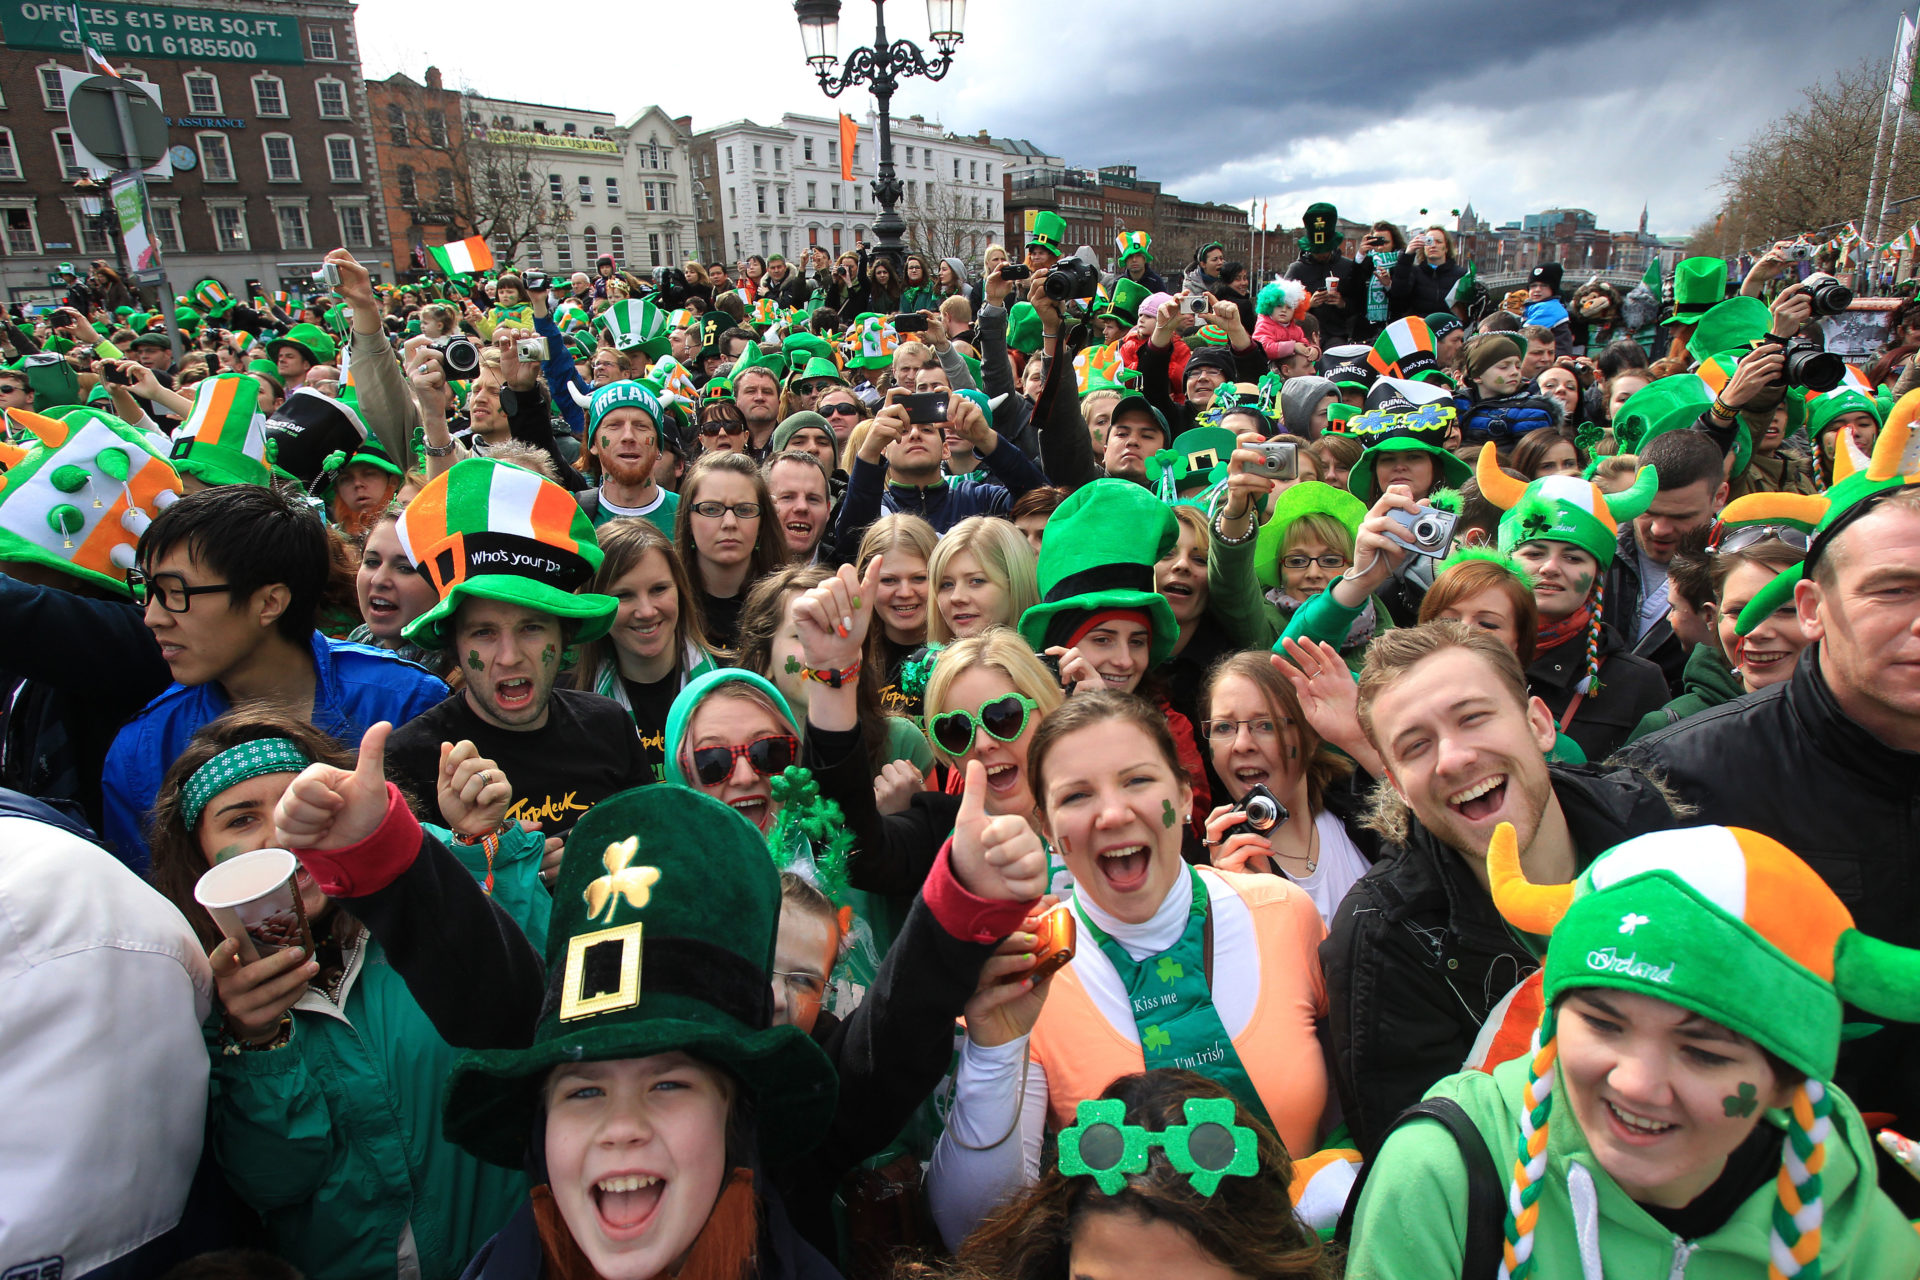 'Eyes of the world on Ireland' as thousands flock to St Patrick's Day